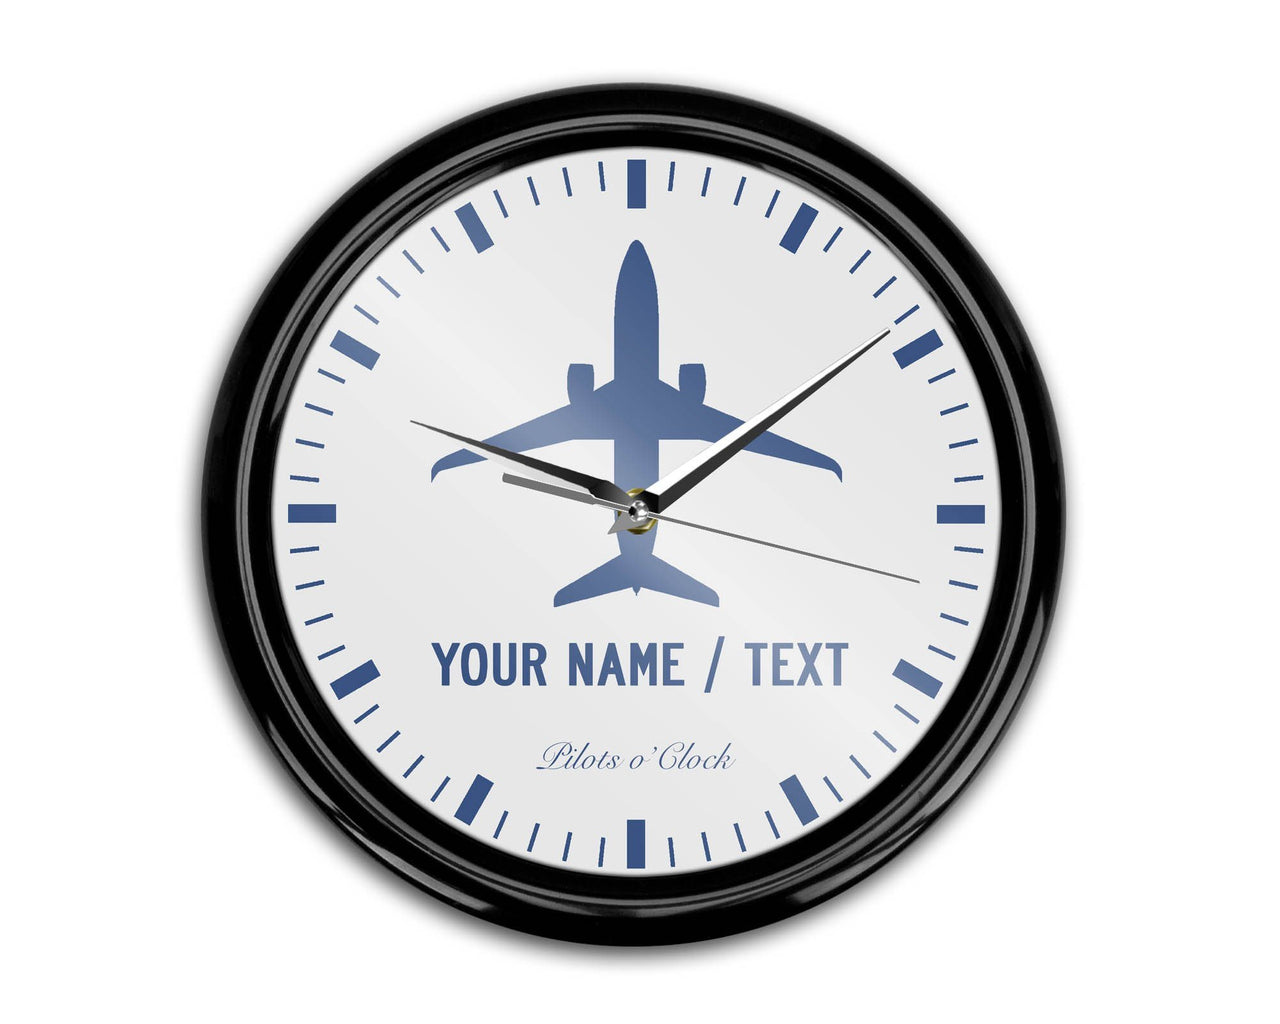 Your Name / Text Printed Wall Clocks Aviation Shop 